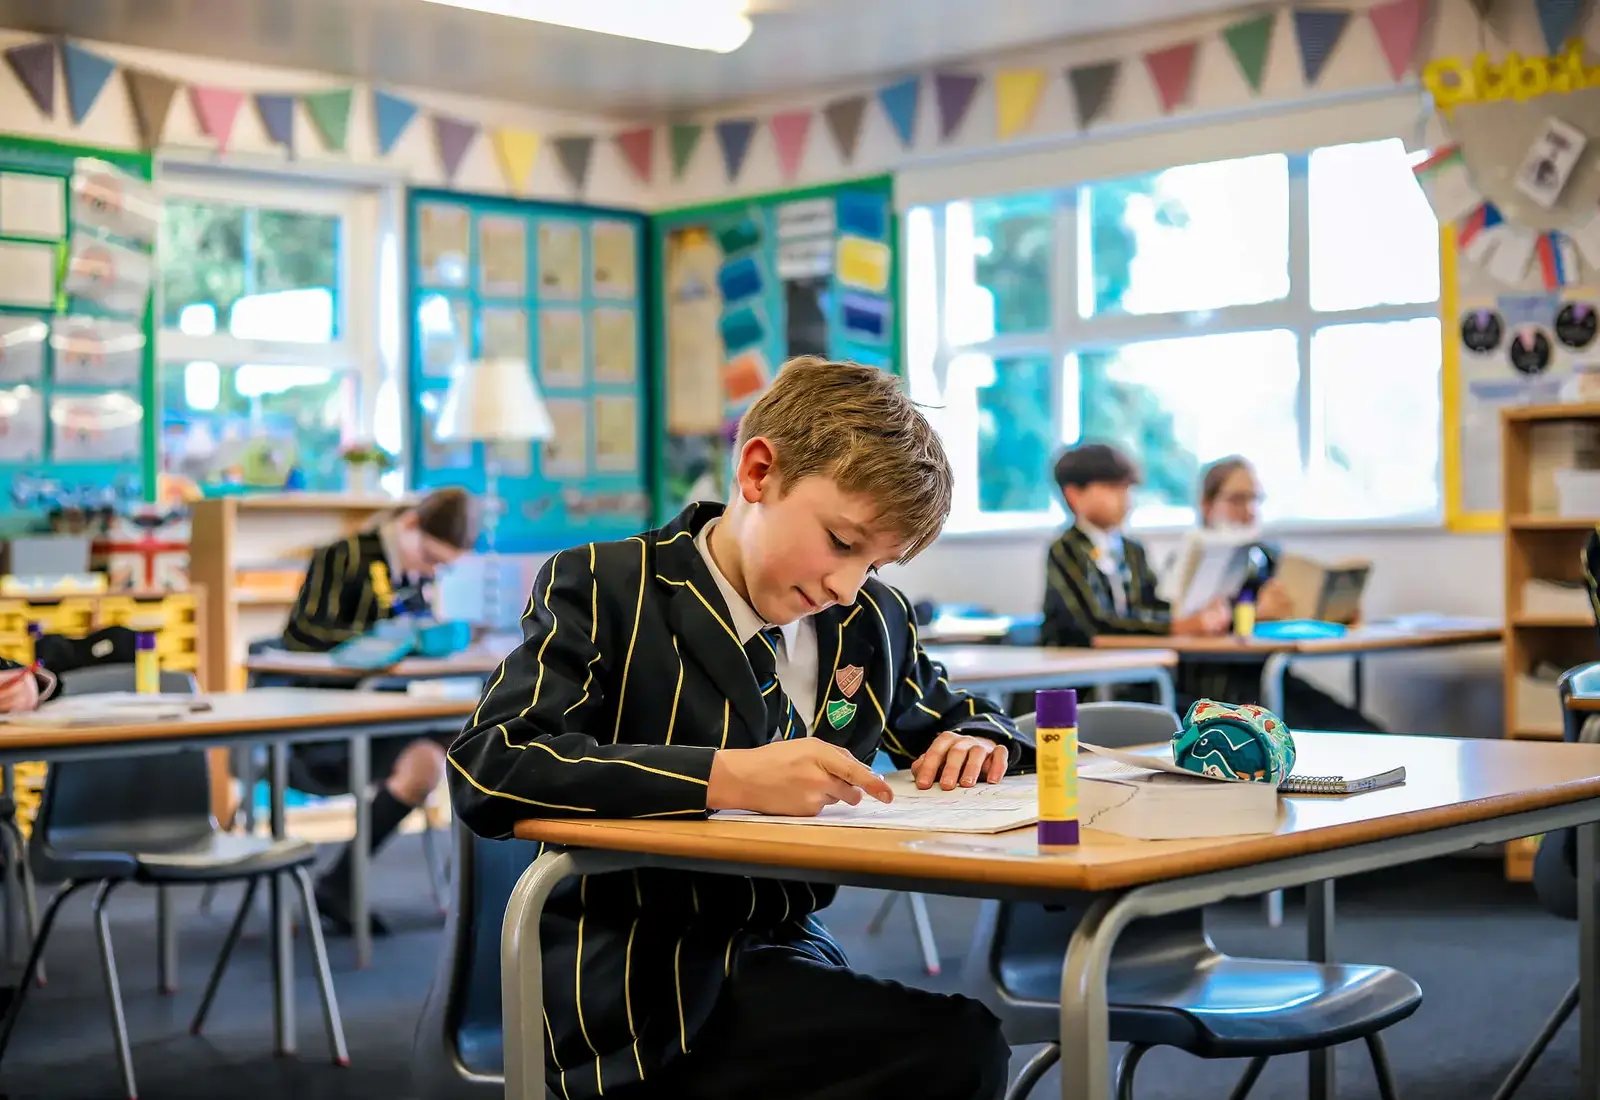 Prep Pupils in class at The Ryleys School, a private school in Alderley Edge, Cheshire